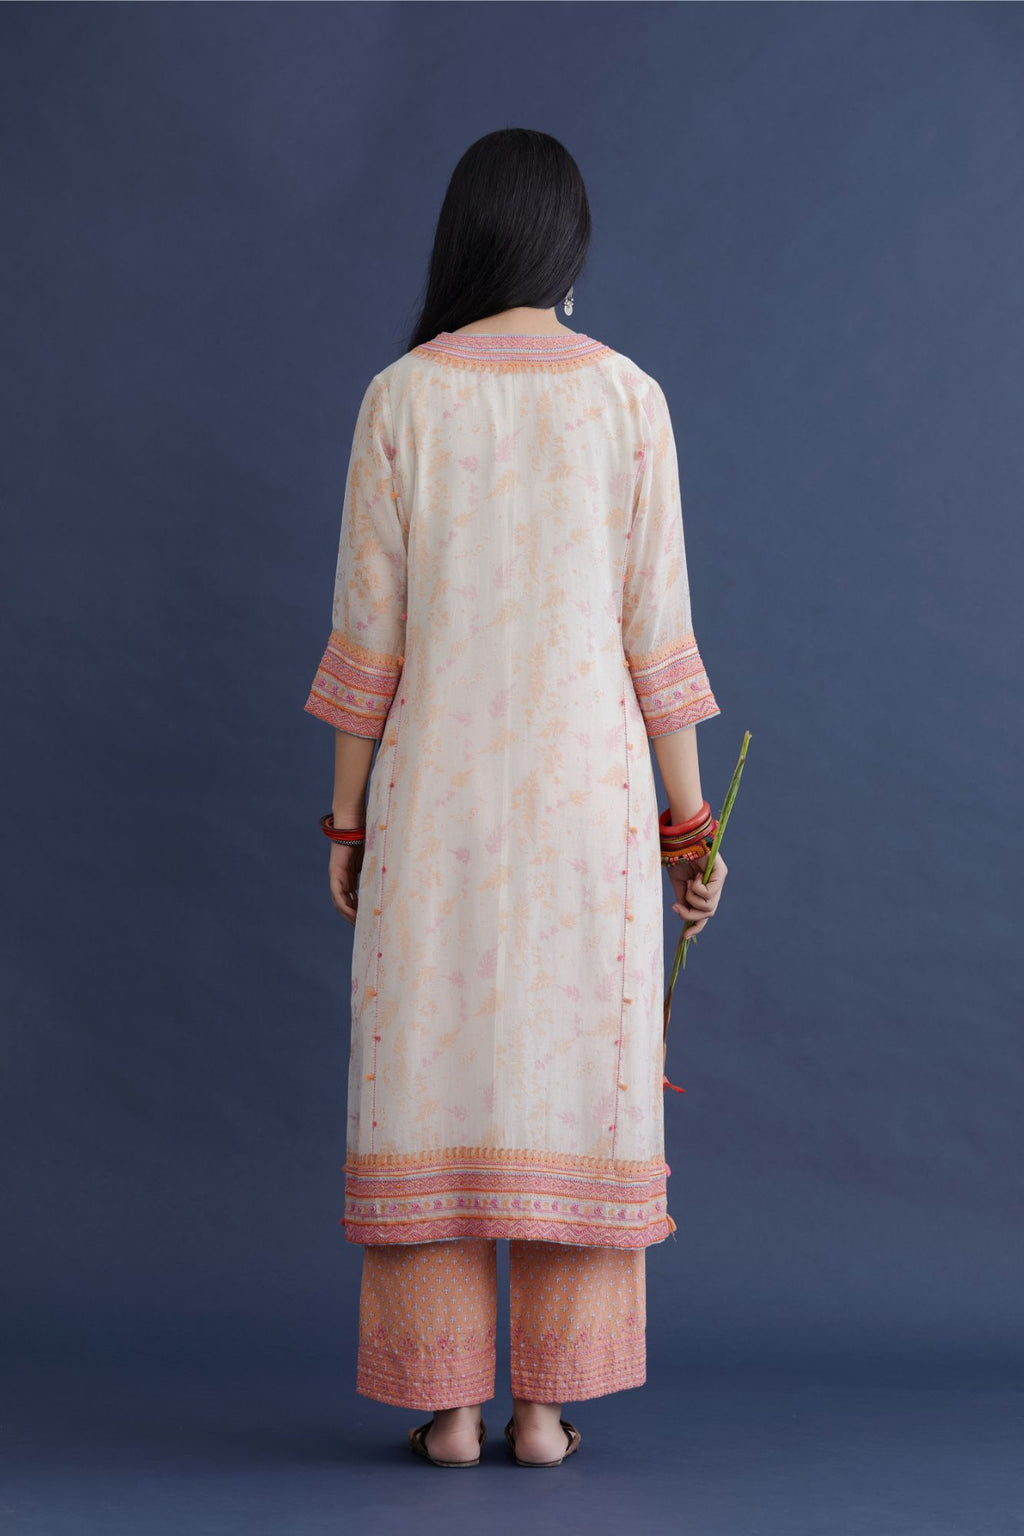 Off white straight kurta set with heavy embroidered button placket neckline and delicate bead and tassel embroidery at side panel joint seams